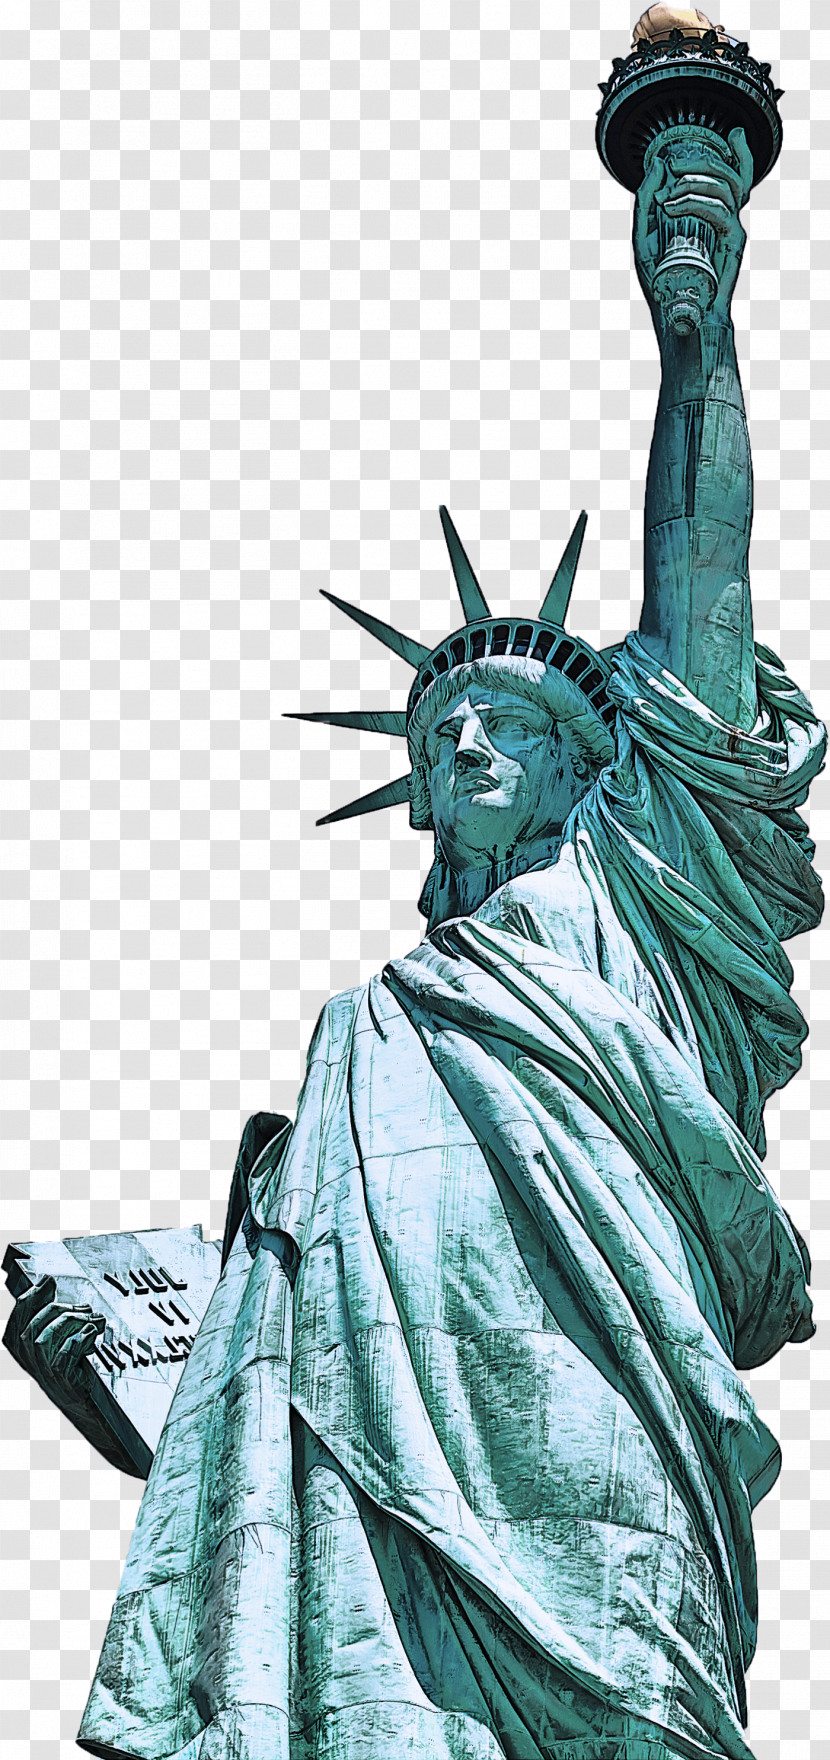 Statue Sculpture Classical Sculpture Stone Carving Statue Of Liberty National Monument Transparent PNG